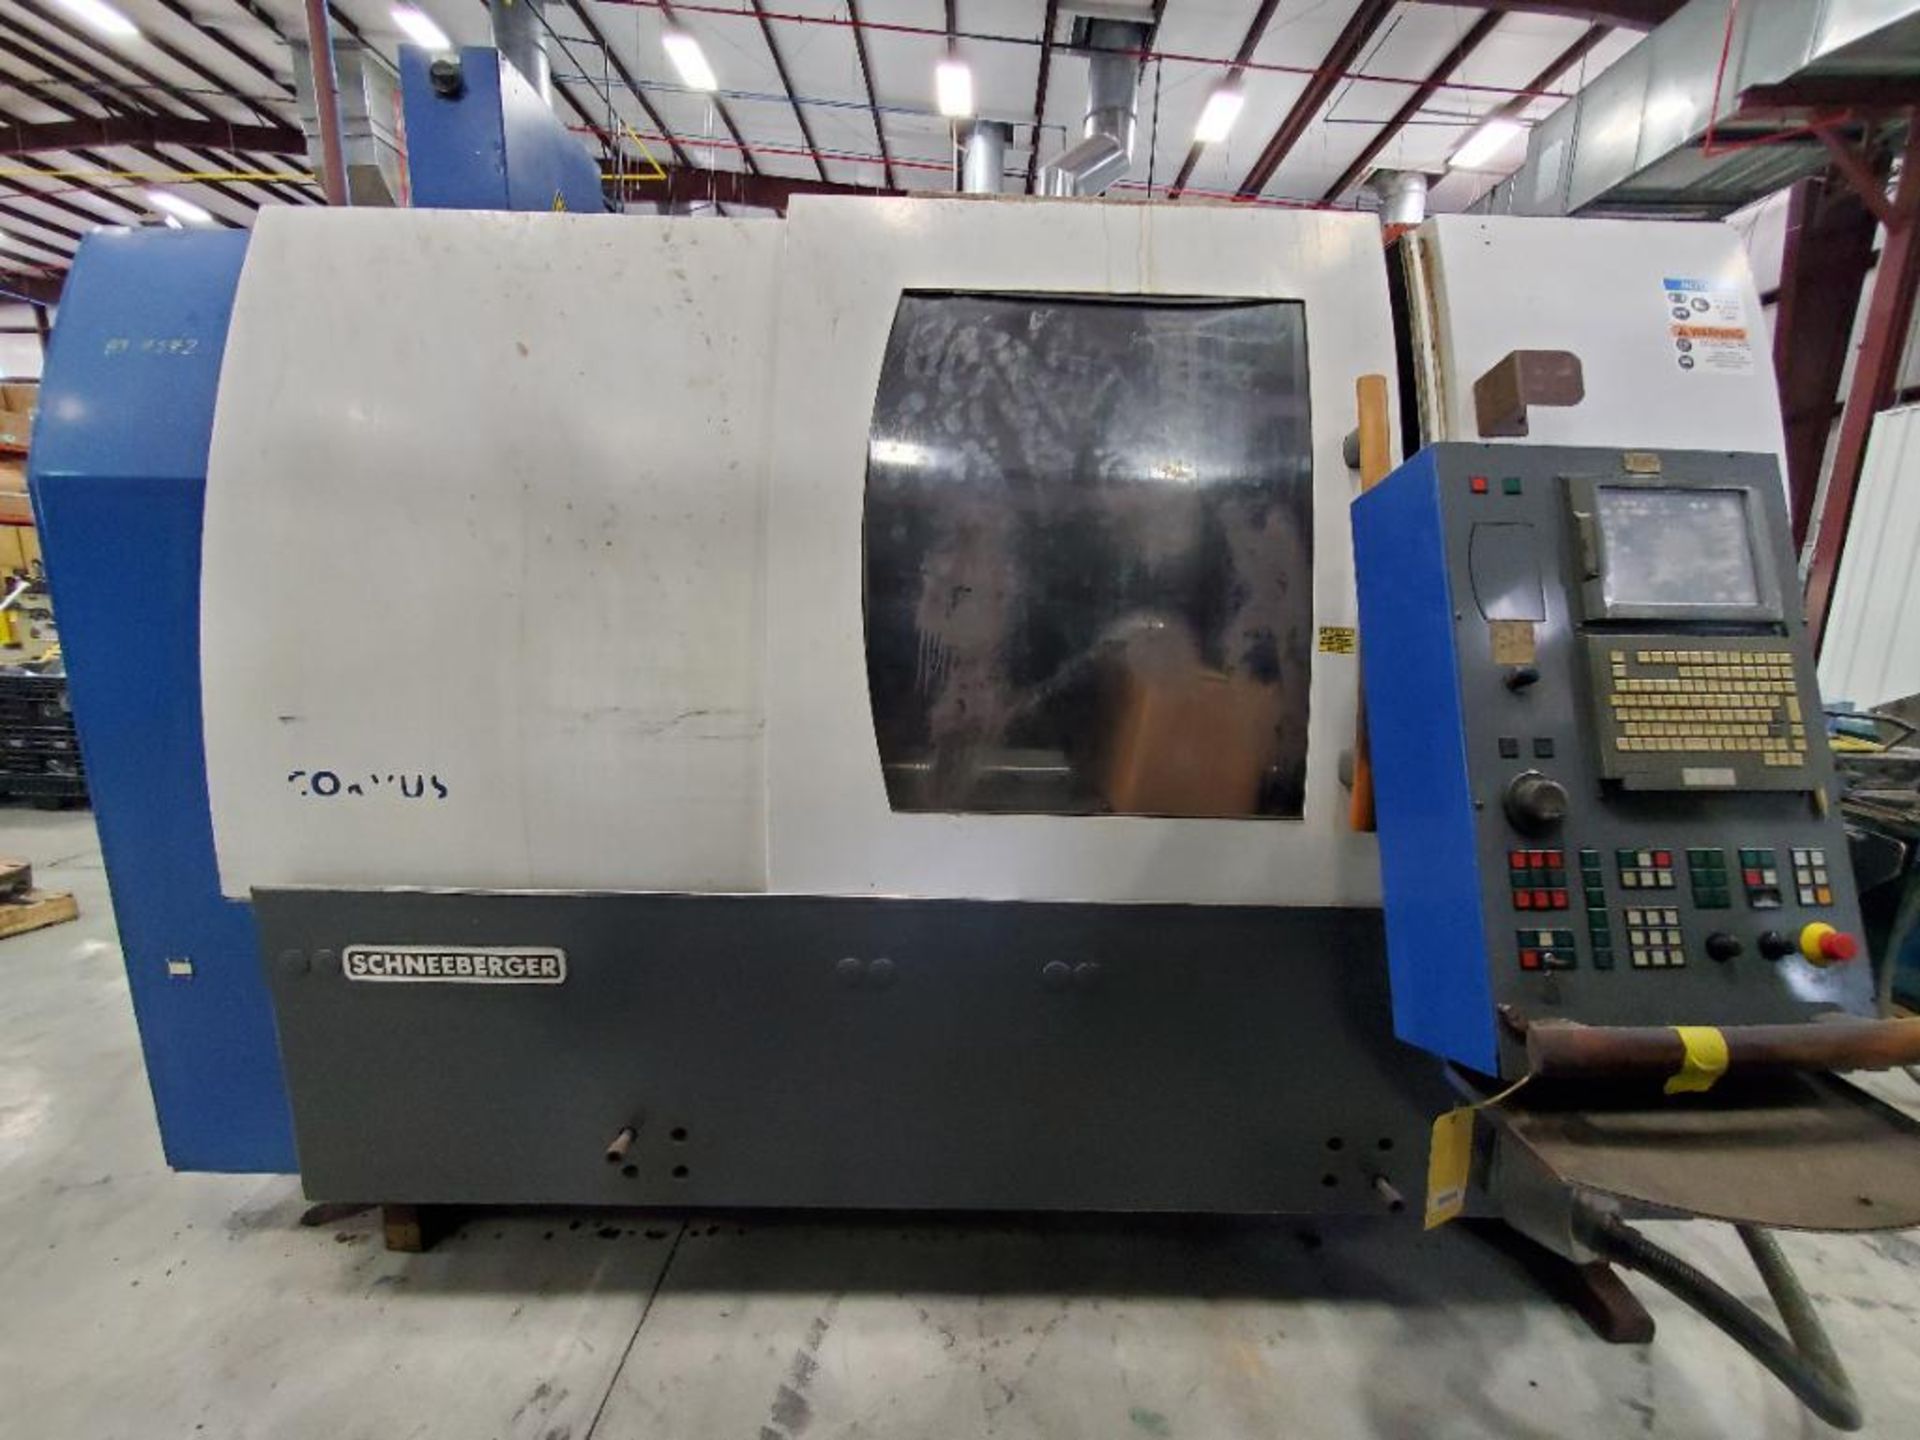 Schneeberger CNC Broach Grinder, Type CORVIS BBA, S/N 20427, 3-Axis, 32" x 8" PMC, 84" x 15" Table,